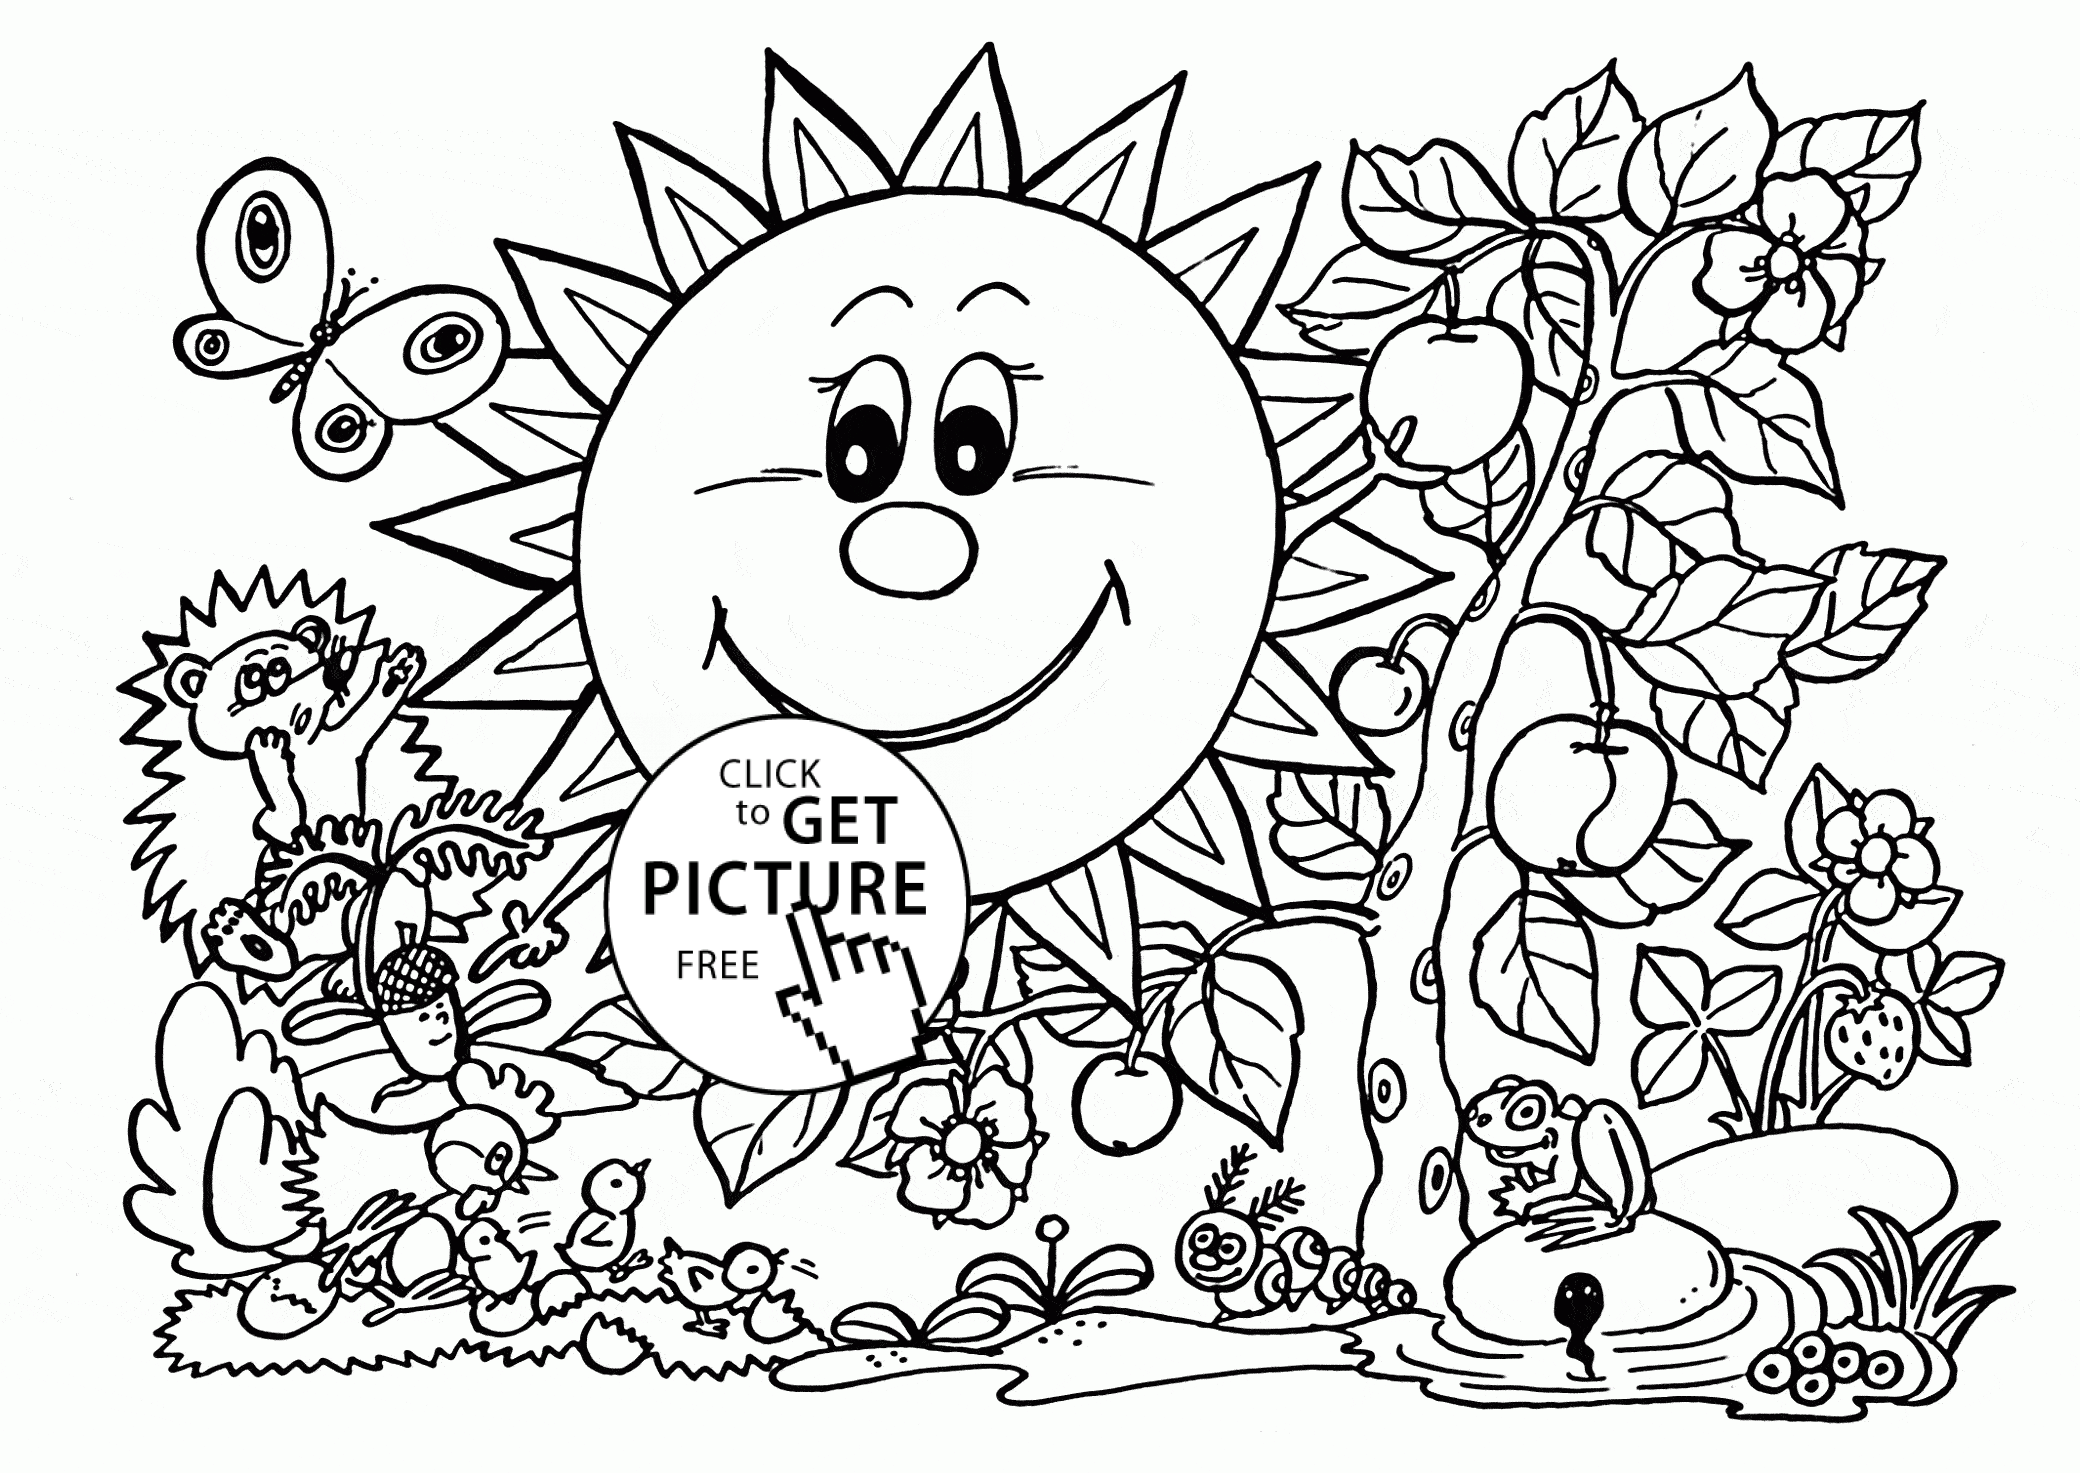 Sunny Garden coloring page for kids, seasons coloring pages ...